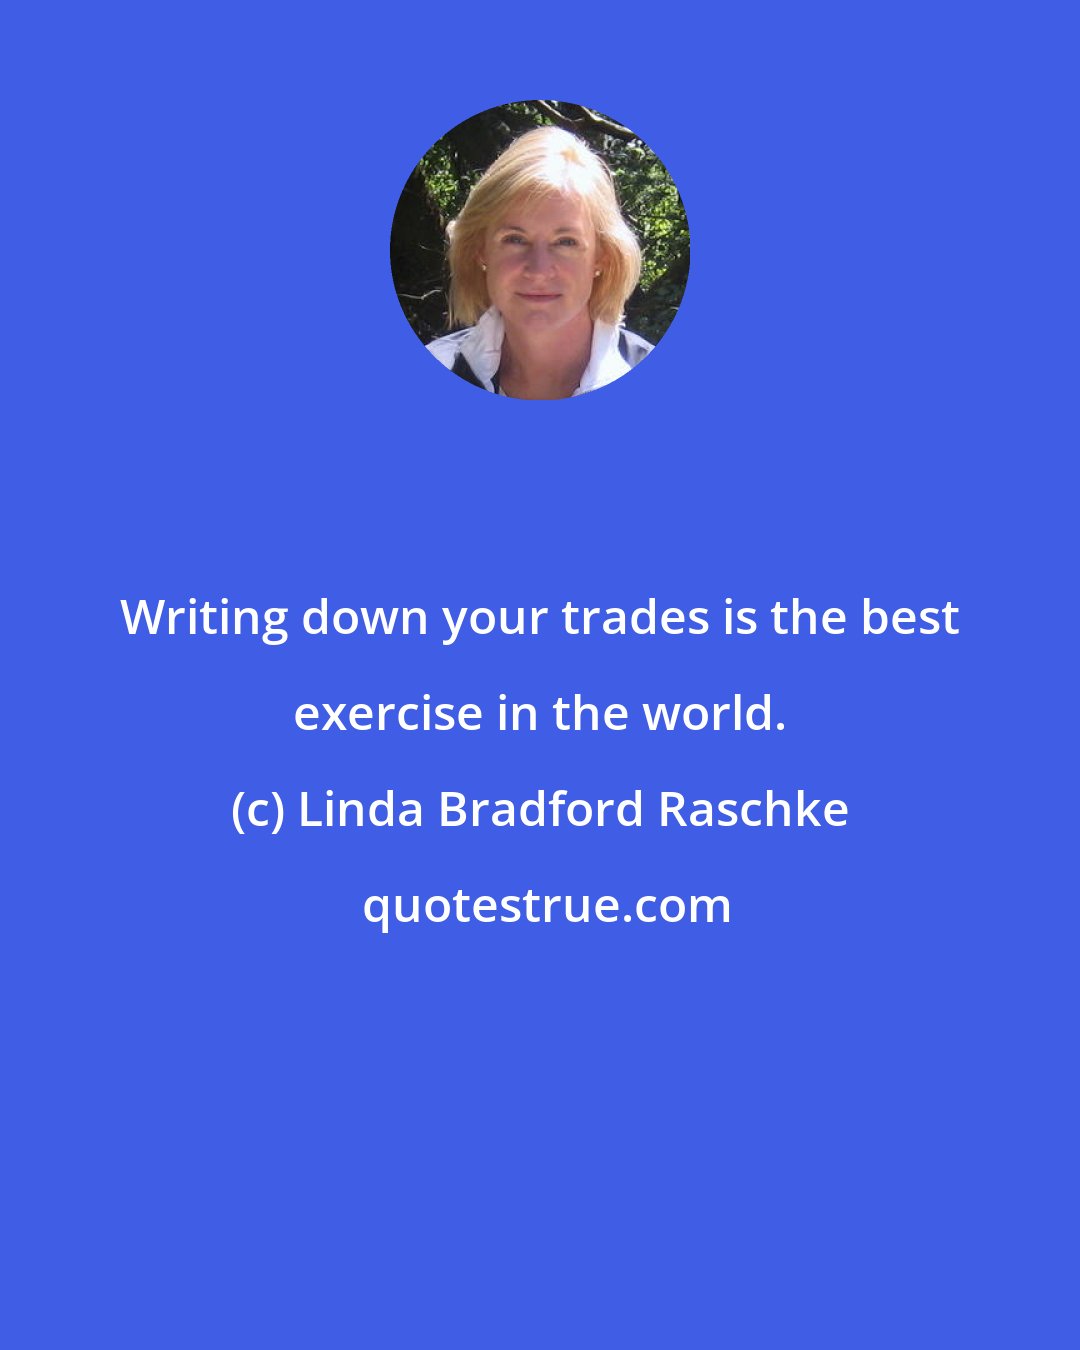 Linda Bradford Raschke: Writing down your trades is the best exercise in the world.